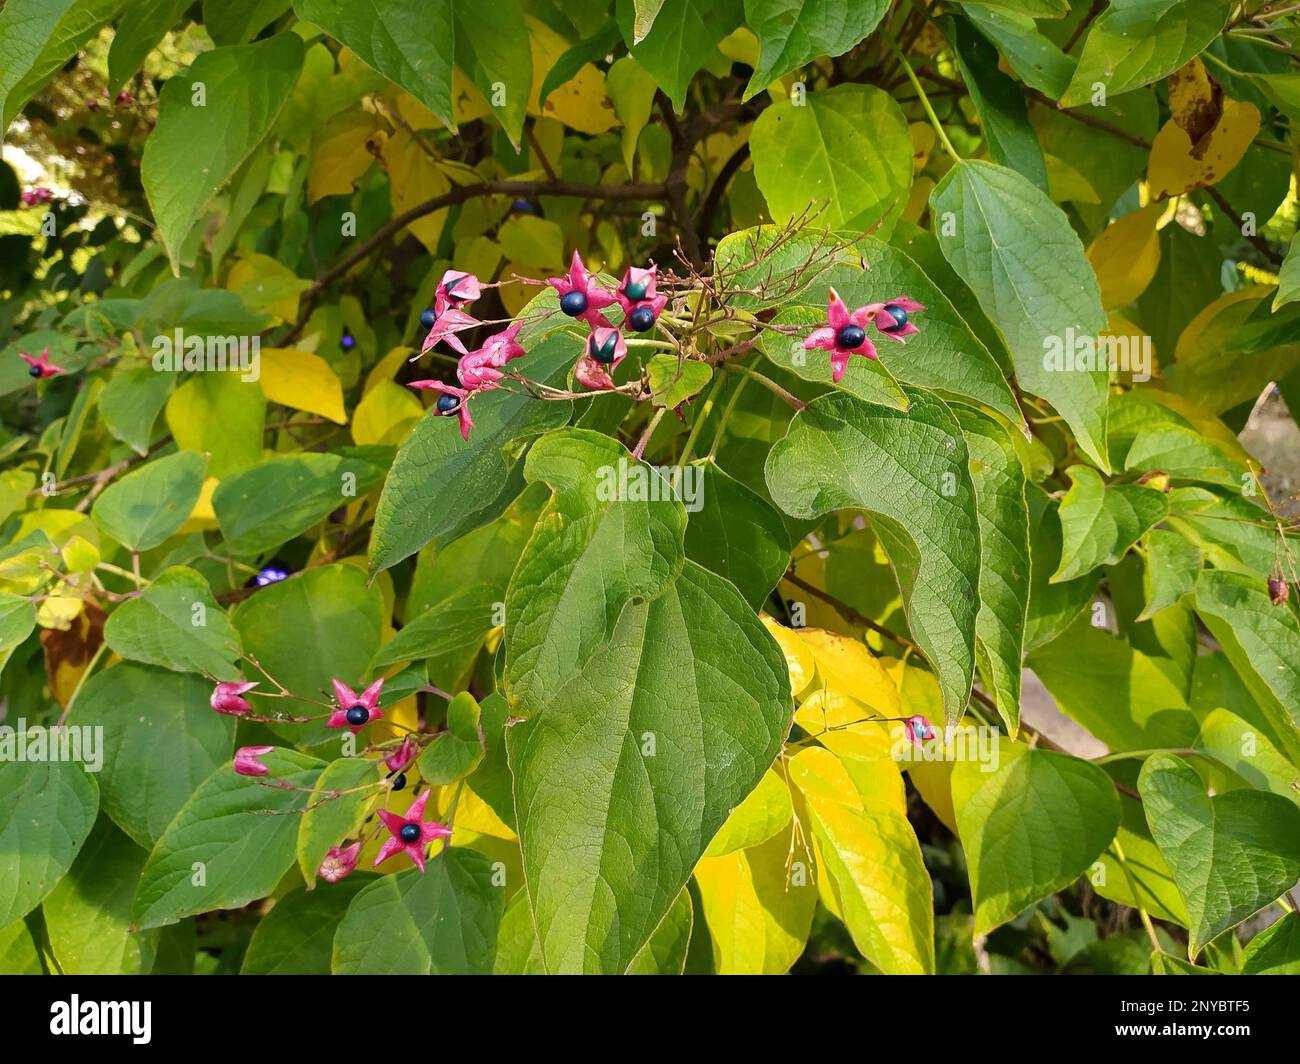 Glorybower (Clerodendrum trichotomum) is a deciduous shrub native to east Asia. Fruits. Stock Photo